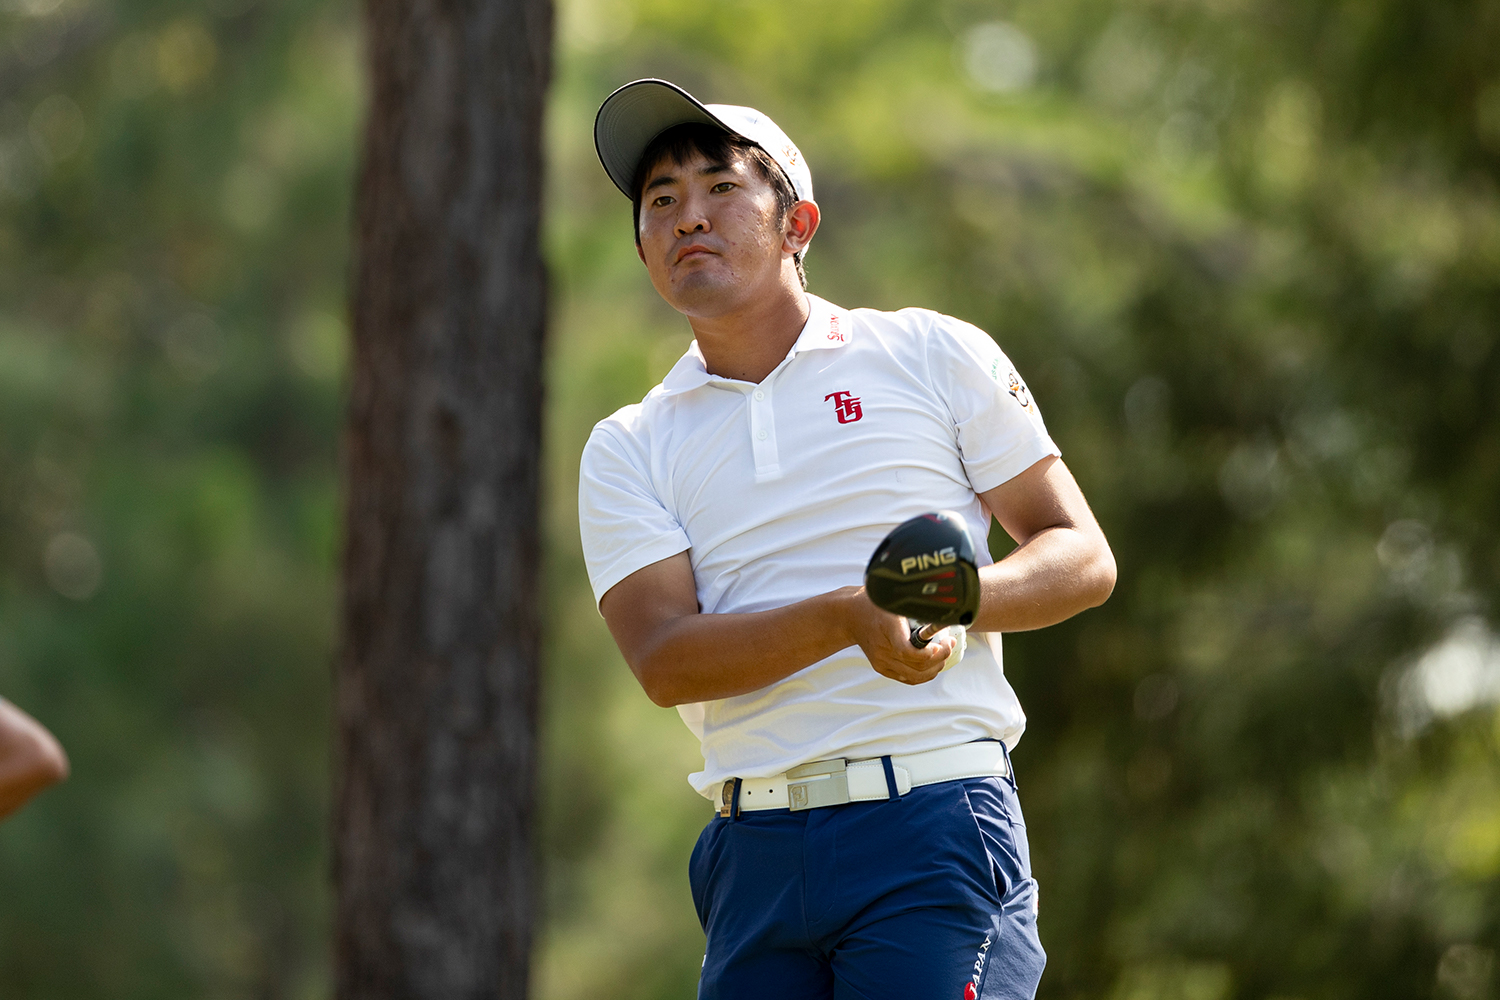 13-year-old Vietnamese golfer listed in World Amateur Golf Ranking